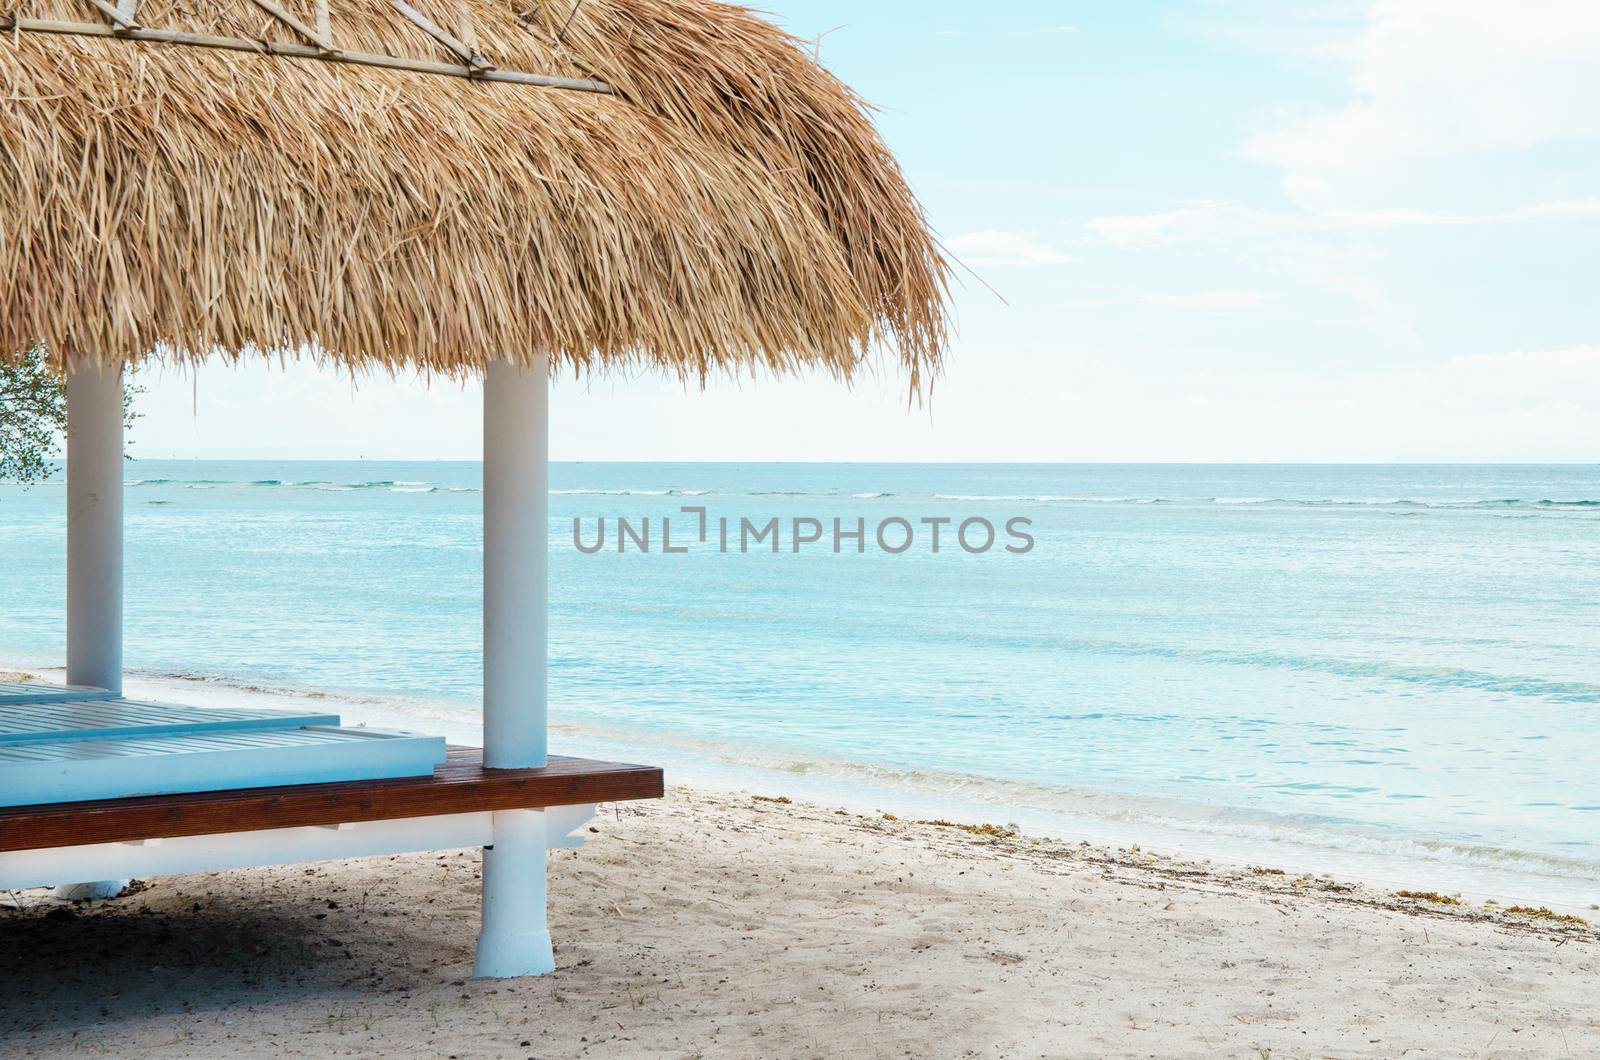 White wooden shelter from the sun on the beach in Bali. Stock image.